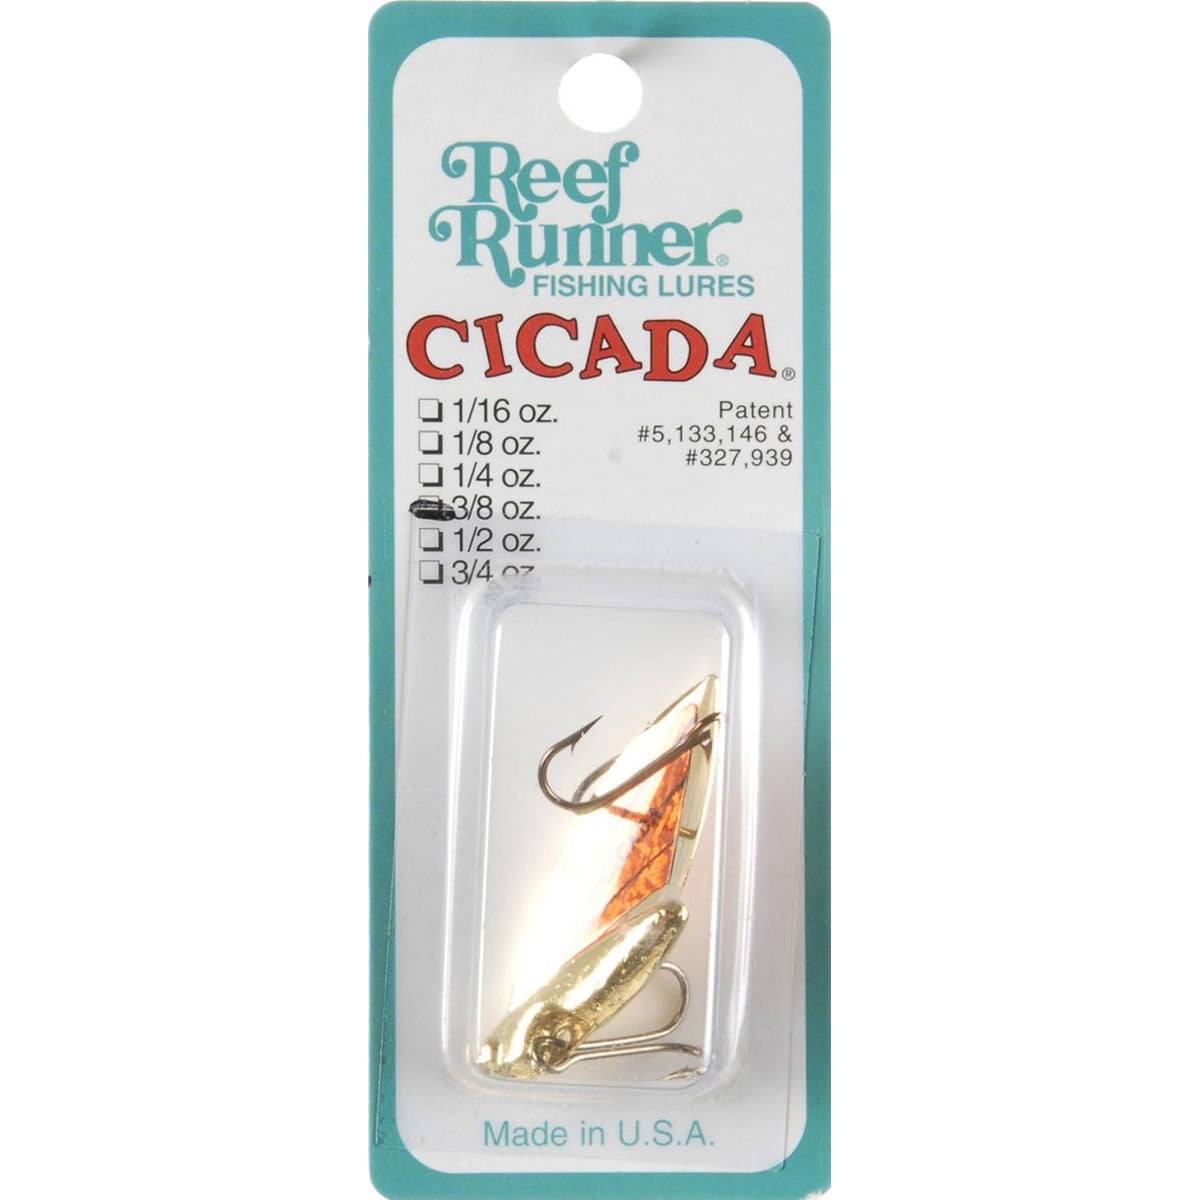 Reef Runner 40203 Cicada Blade Fishing Lure 2 Inch 3/8 Ounce Gold